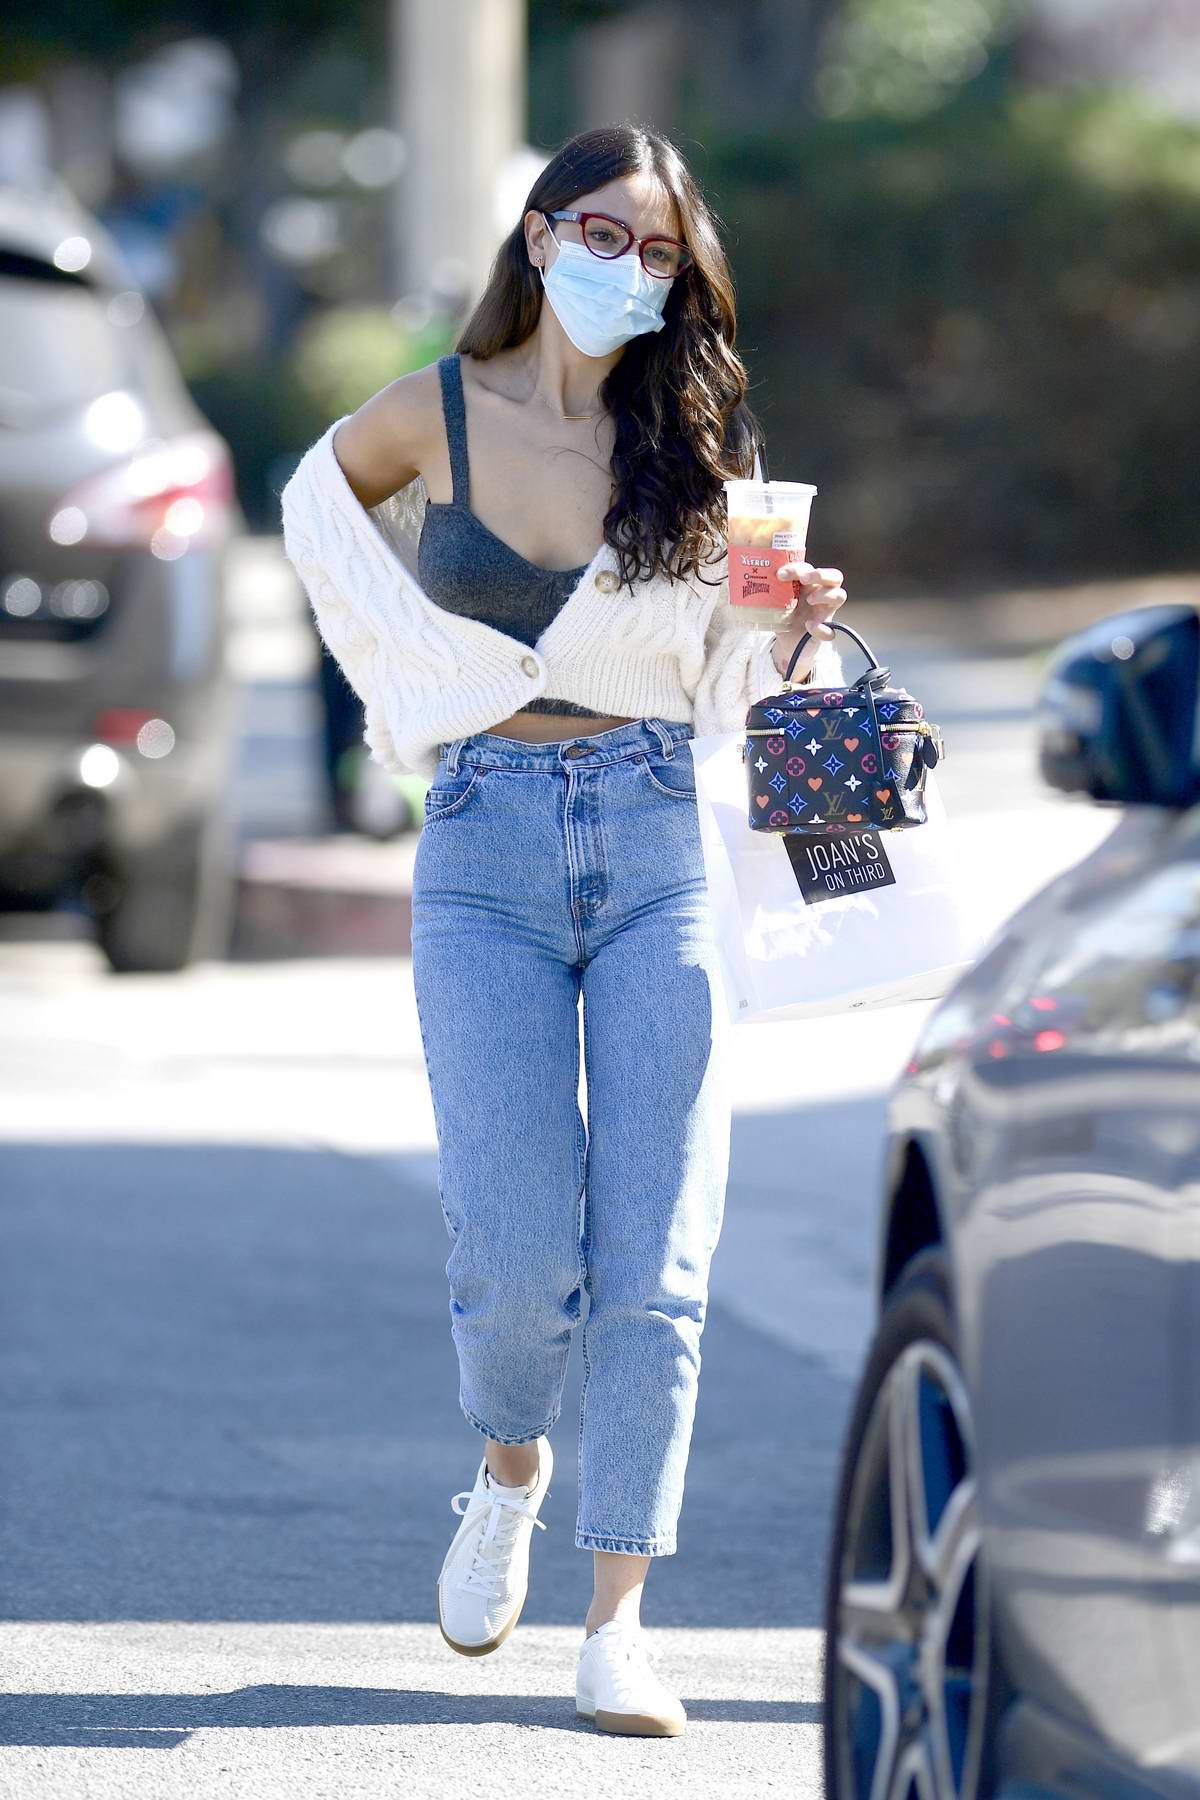 https://www.celebsfirst.com/wp-content/uploads/2020/10/eiza-gonzalez-looks-cute-in-a-black-crop-top-jeans-and-sneakers-while-making-her-morning-coffee-run-in-los-angeles-281020_12.jpg